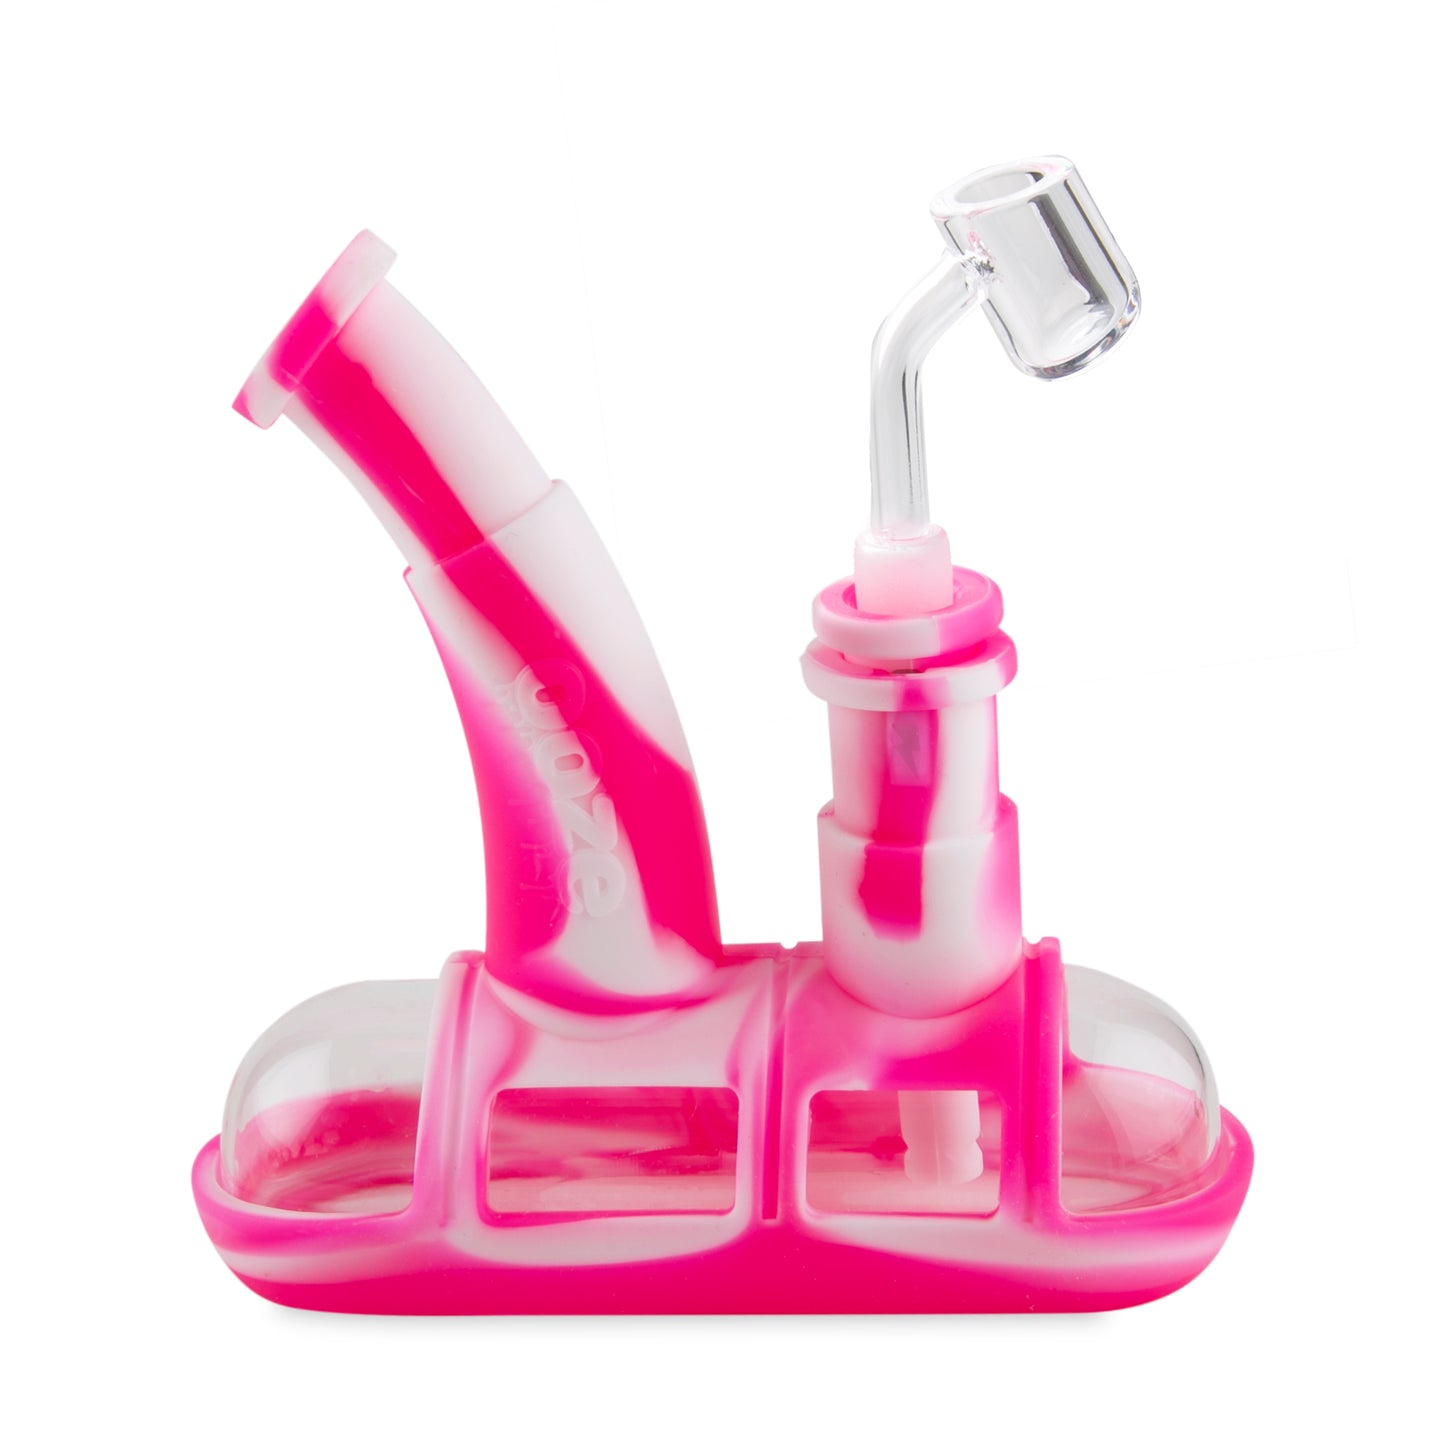 Ooze Steamboat Silicone Water Bubbler & Dab Rig - Flamingo